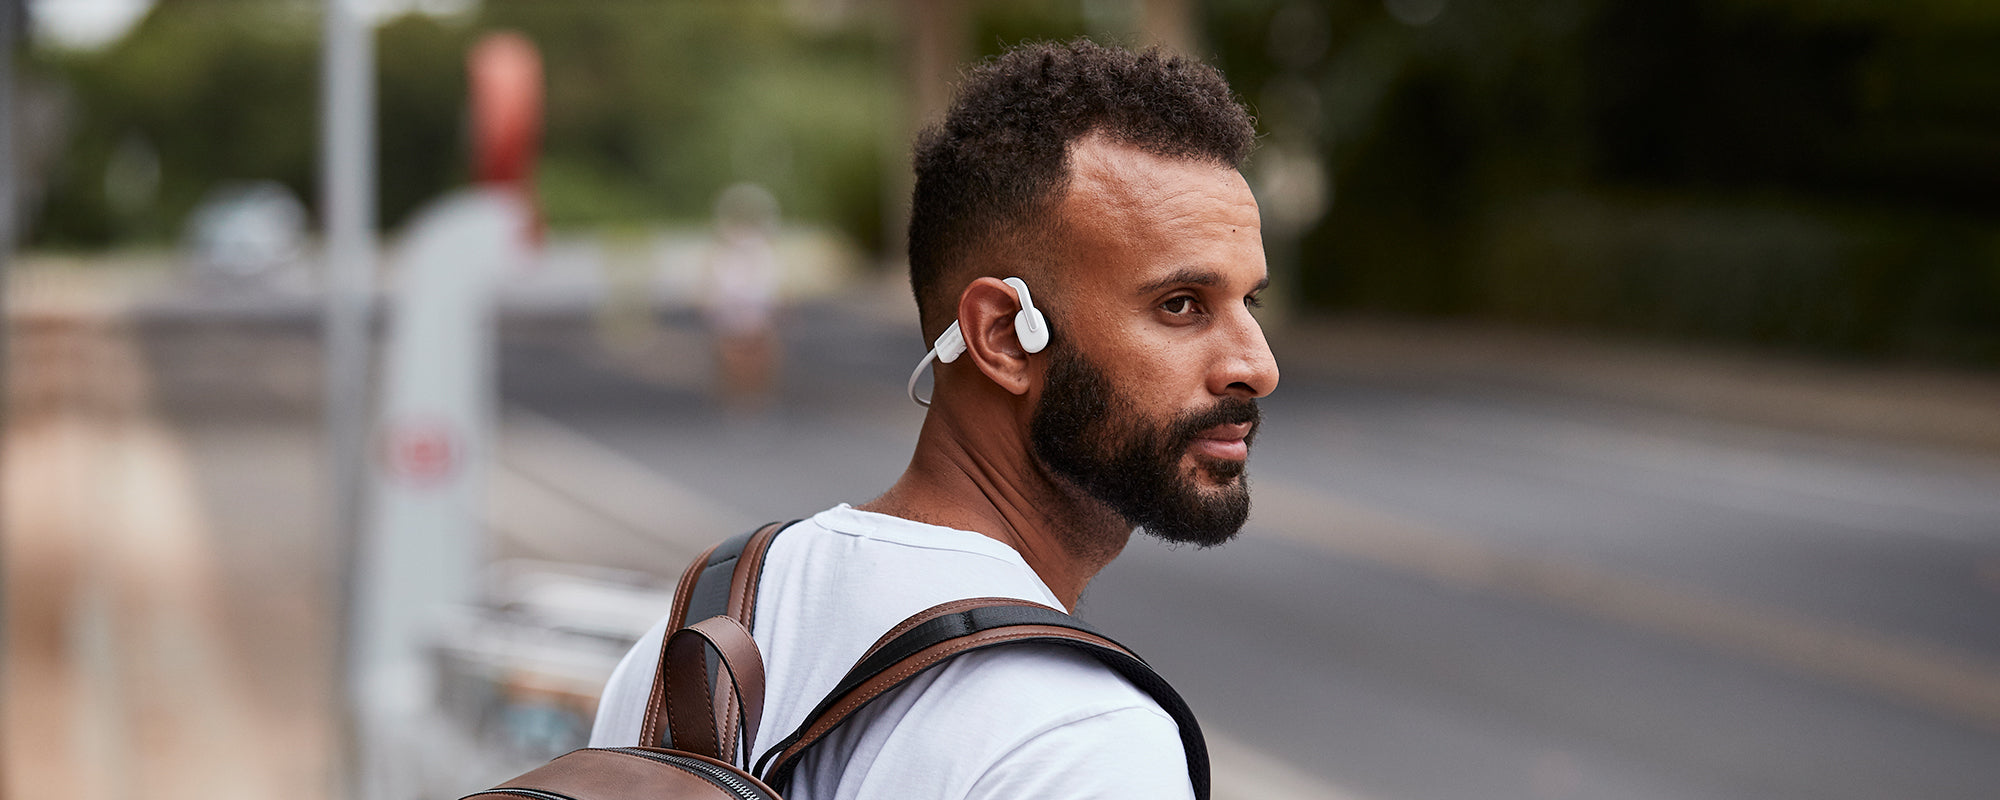 How To Change AfterShokz Sound Settings